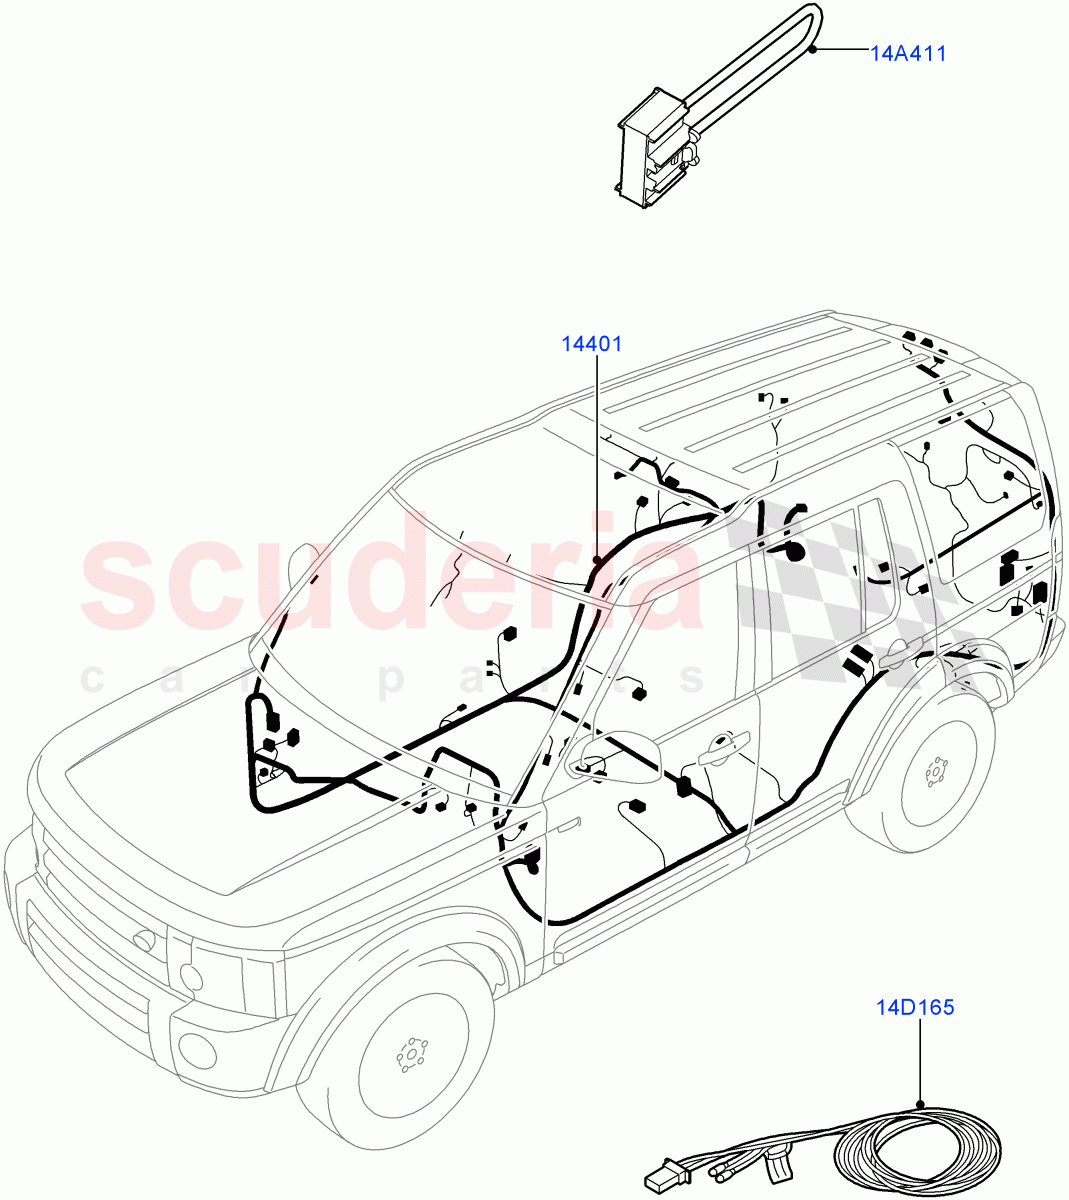 Electrical Wiring - Engine And Dash(Main Harness)((V)FROMBA000001,(V)TOBA999999) of Land Rover Land Rover Discovery 4 (2010-2016) [5.0 OHC SGDI NA V8 Petrol]